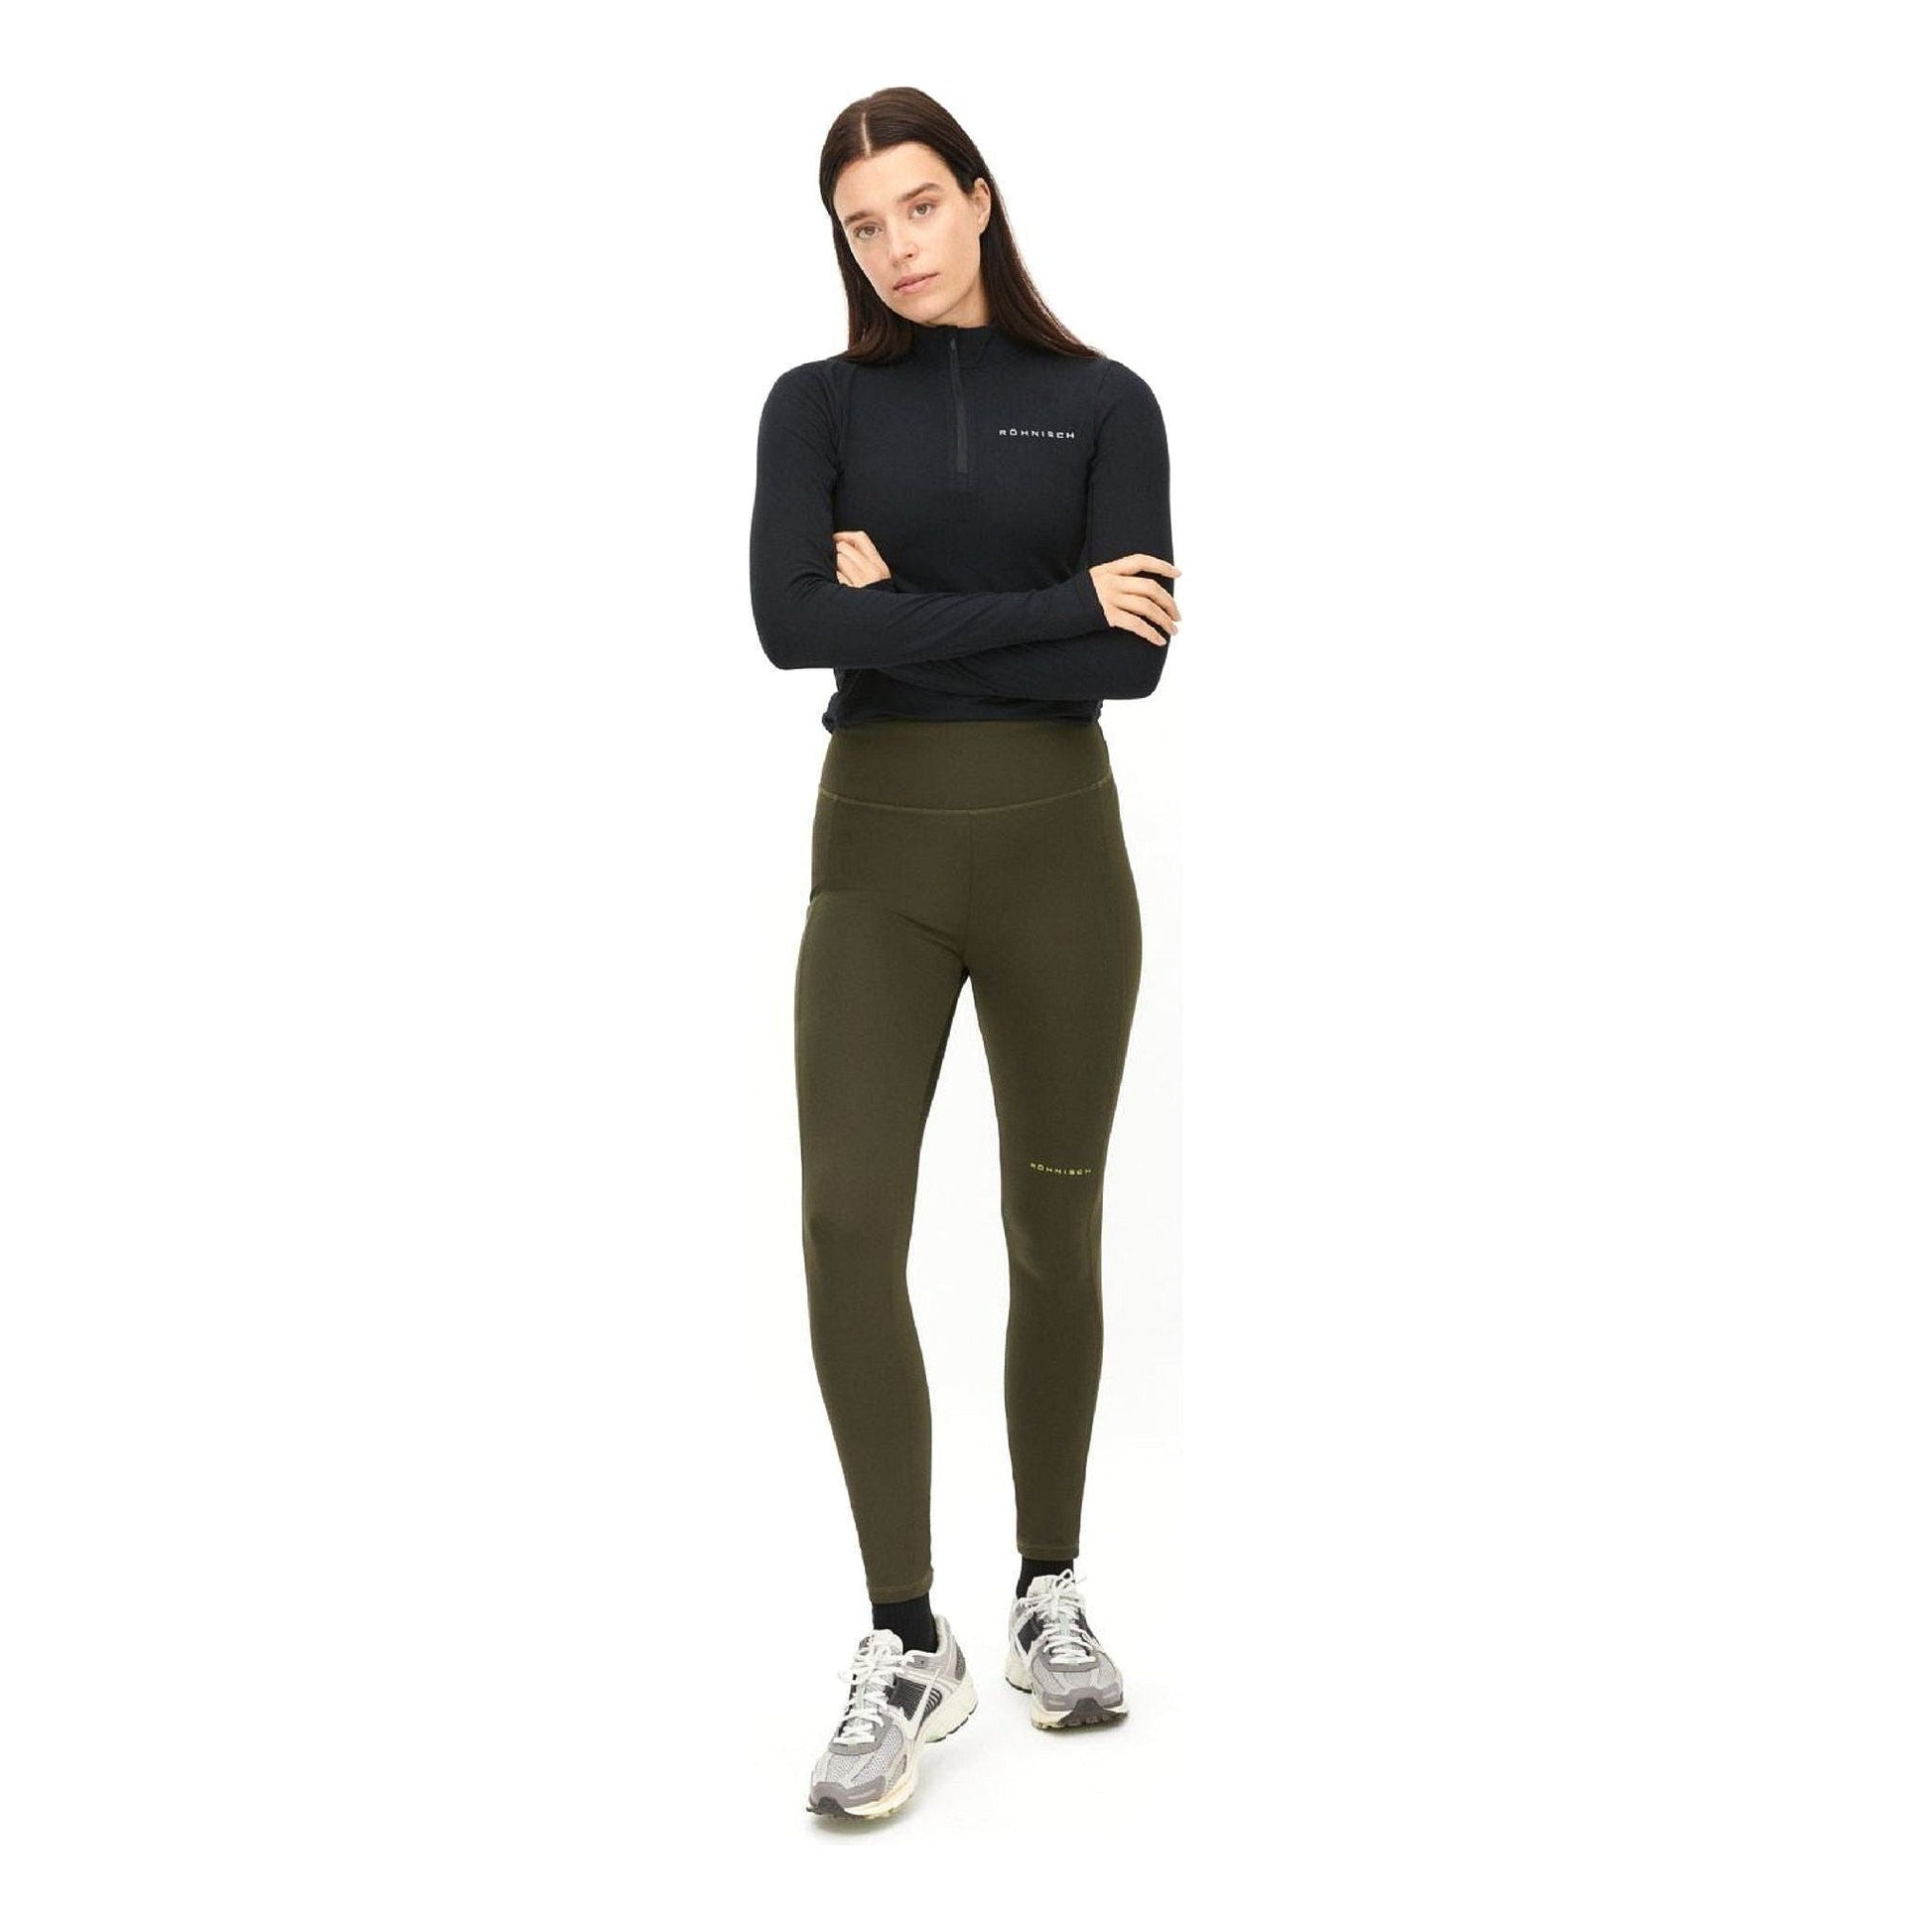 Rohnisch W Leggings Thermal Tights, Forest Brown